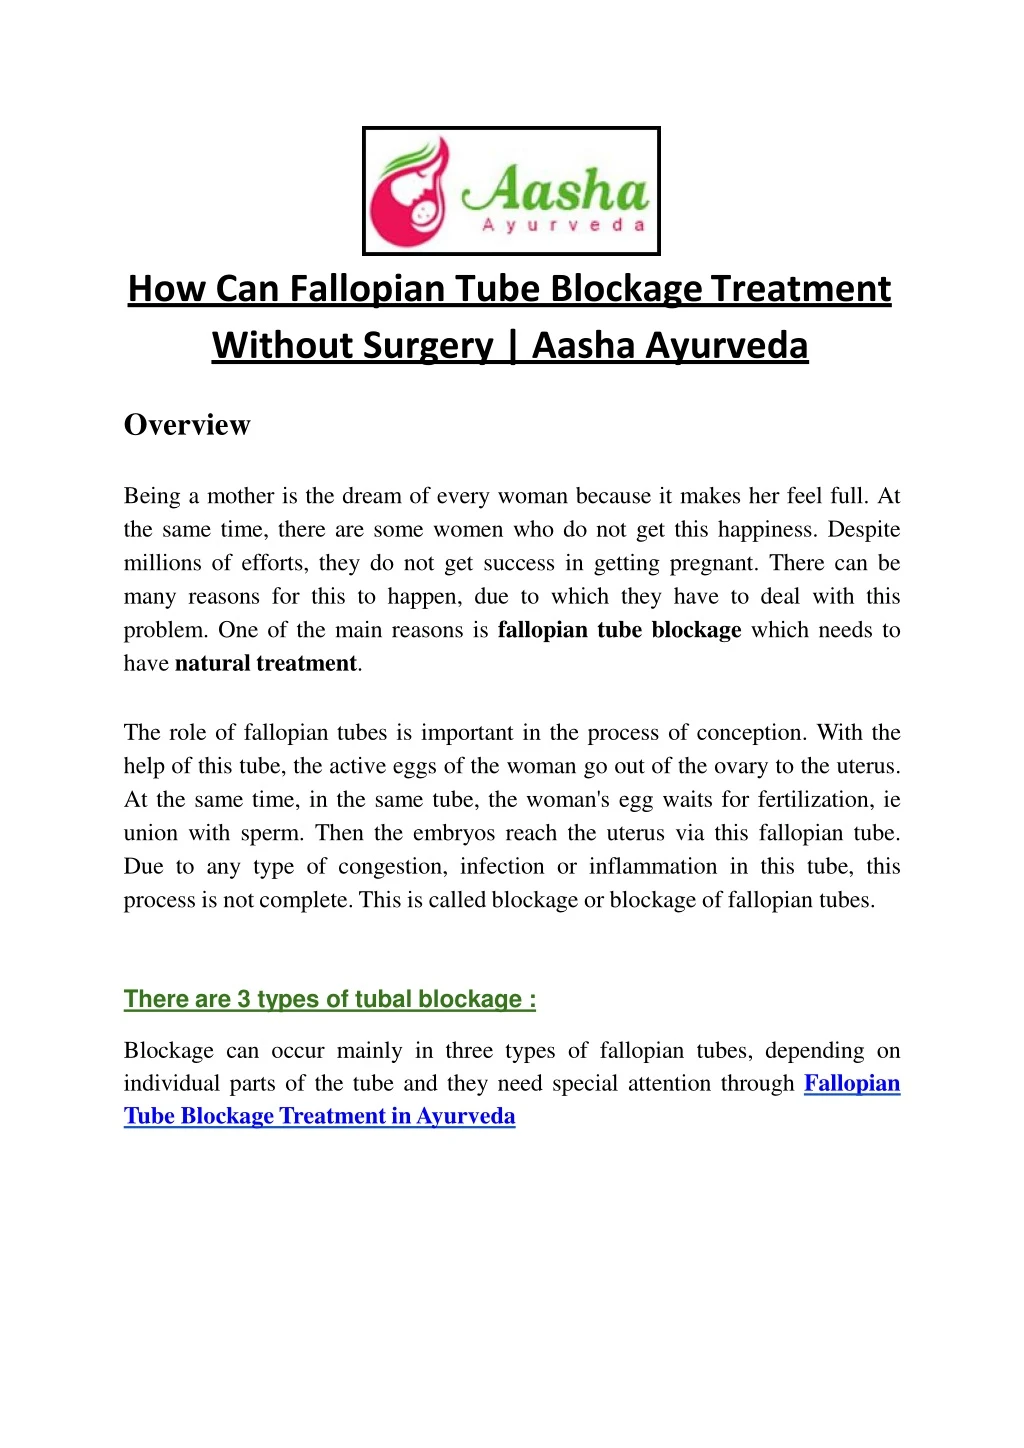 how can fallopian tube blockage treatment without surgery aasha ayurveda